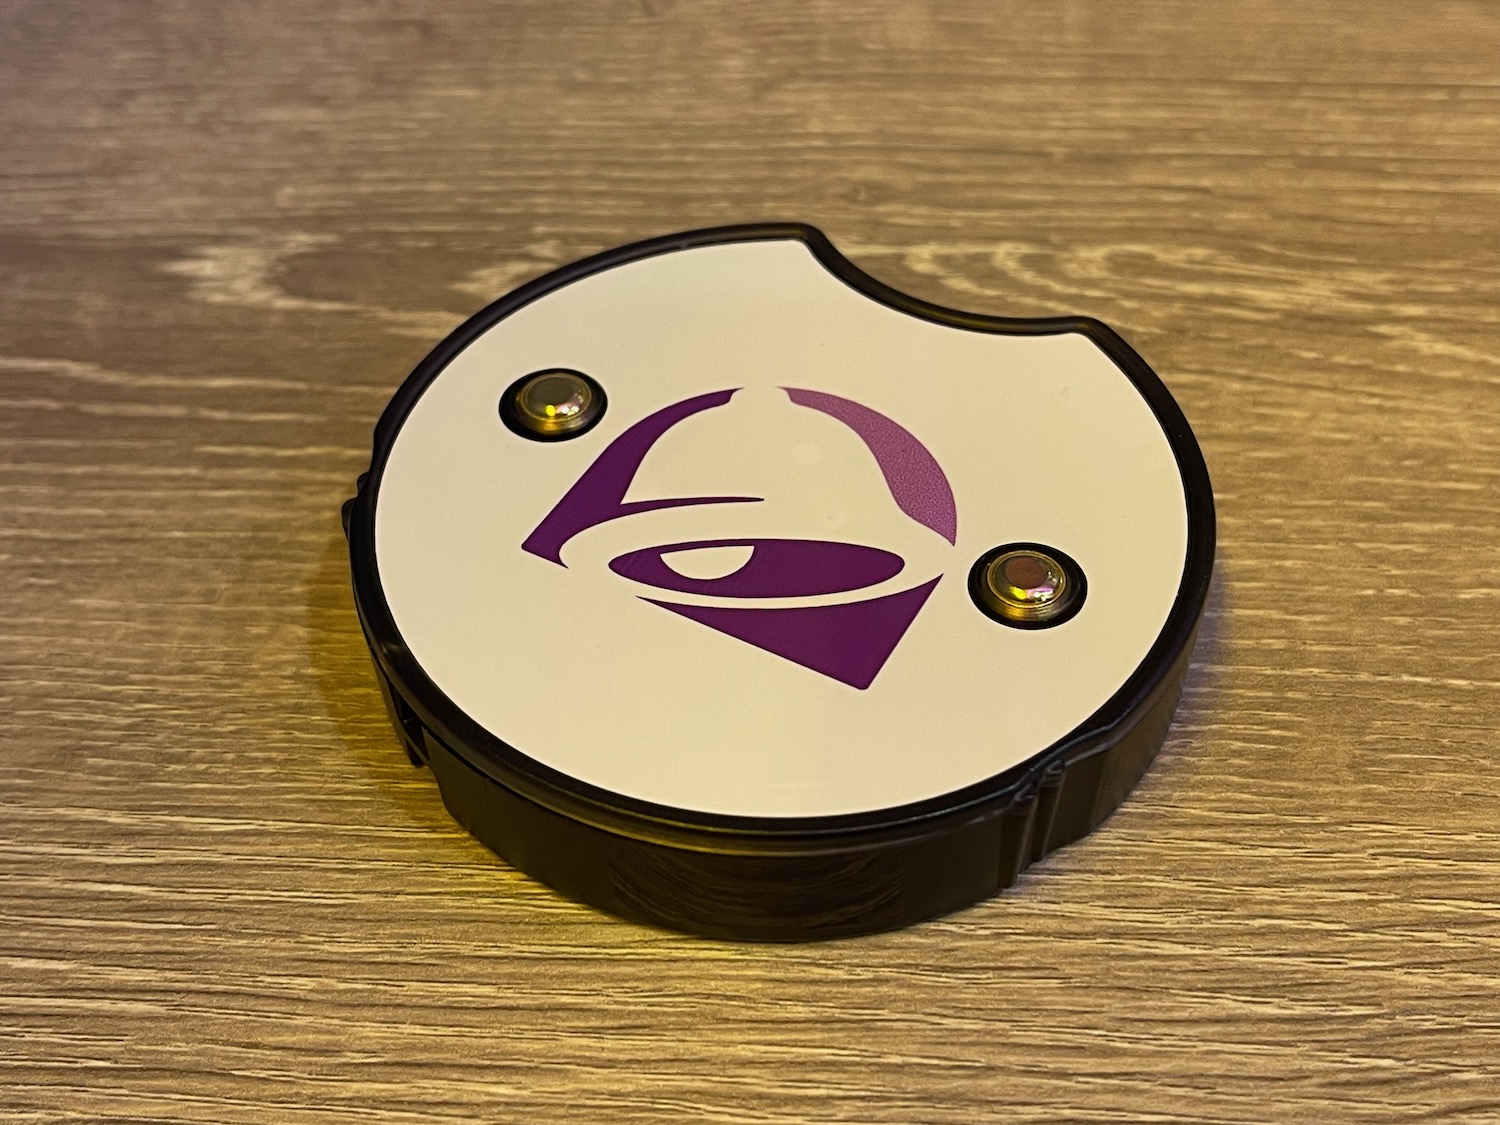 a round white and purple object with a logo on it